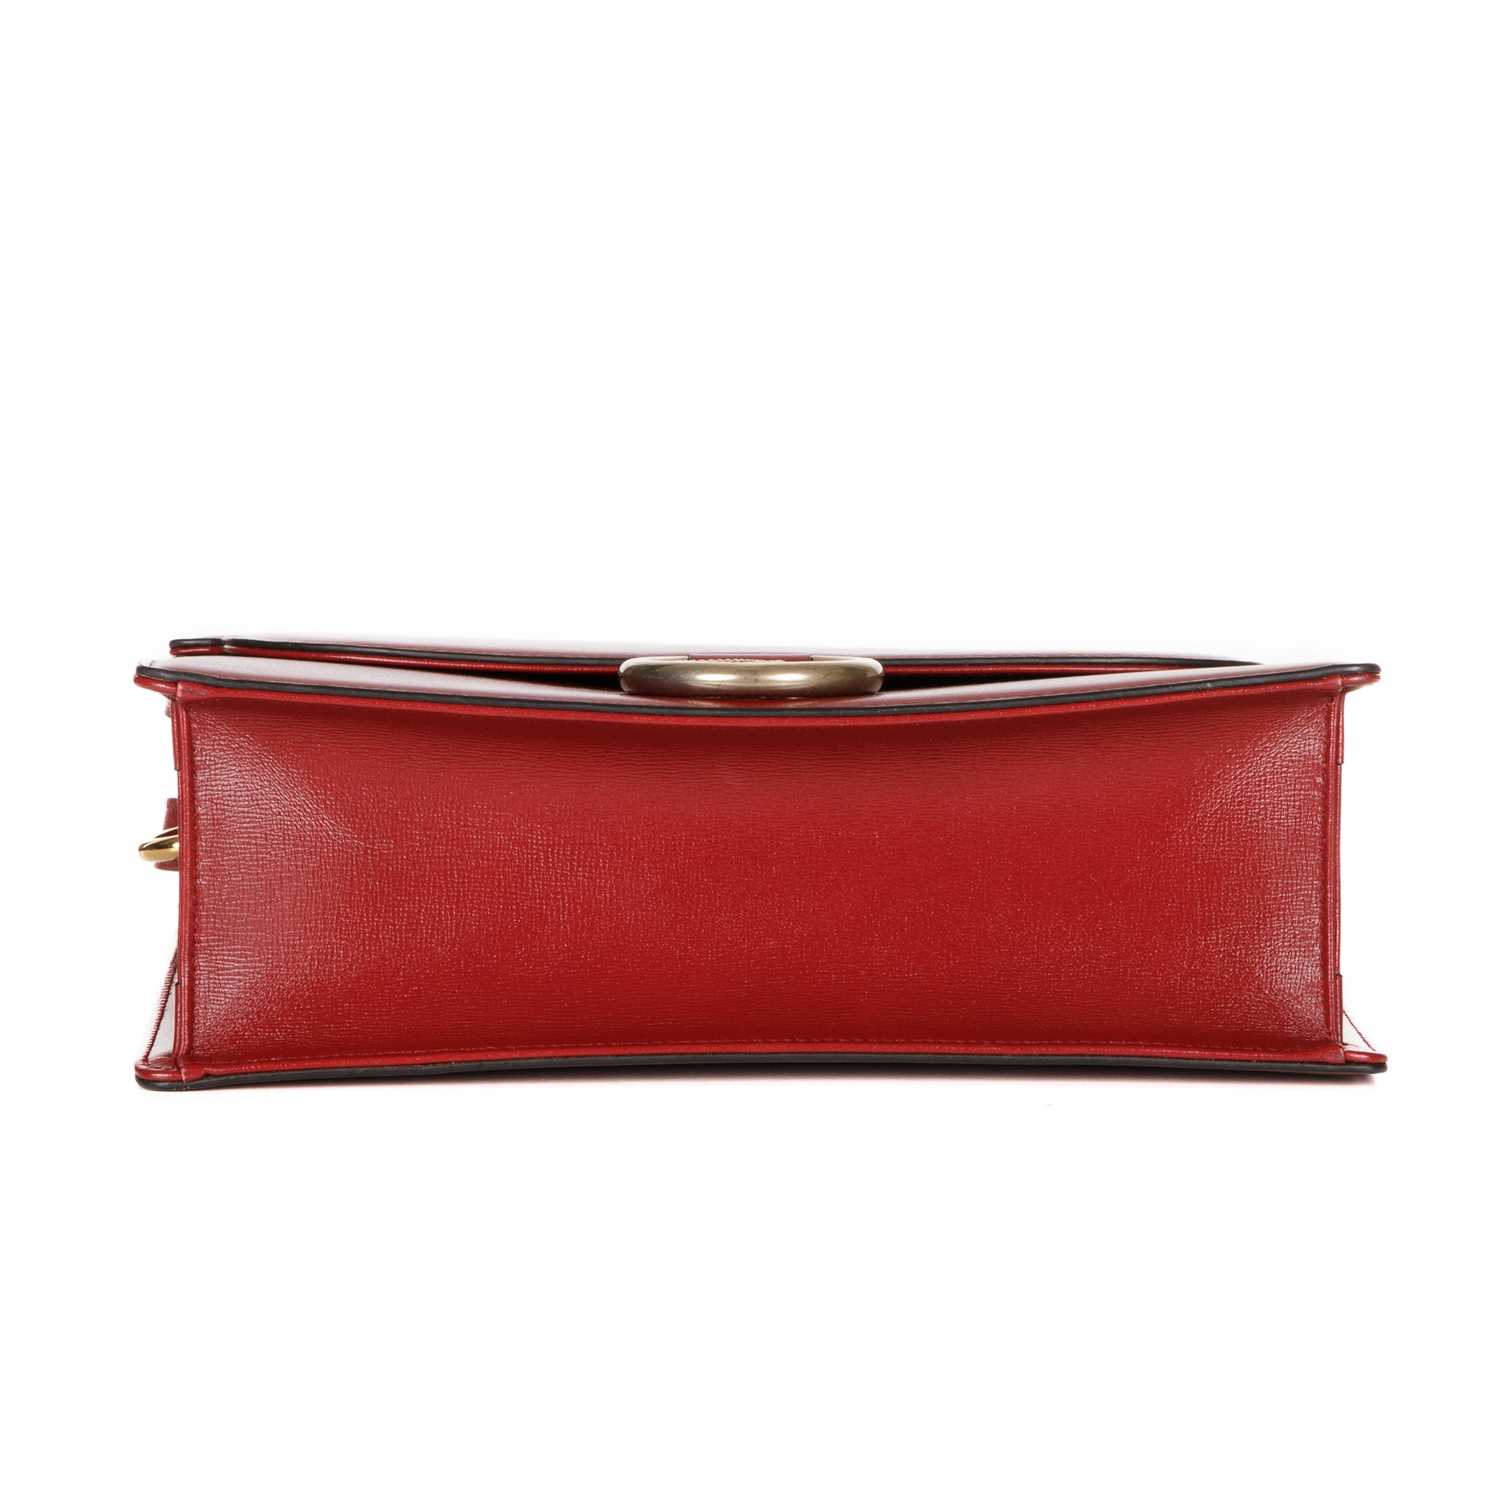 Gucci, a red leather satchel, featuring an adjustable leather shoulder strap, magnetic flap - Image 4 of 5